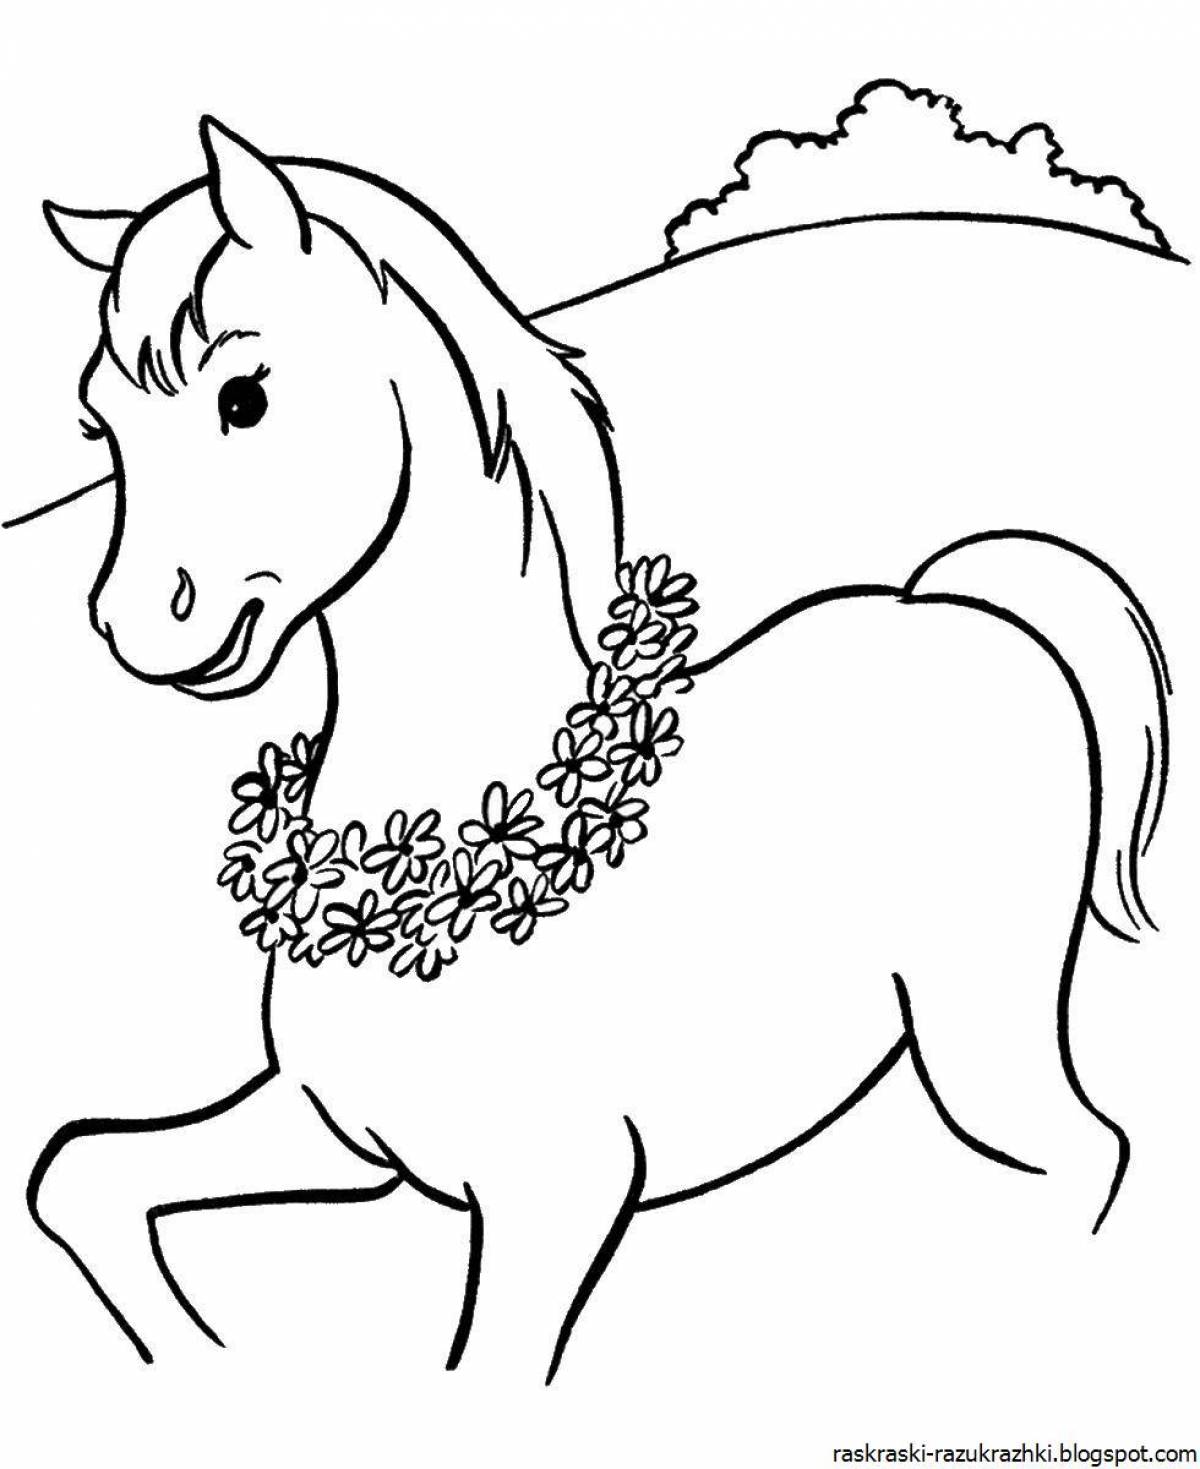 Shining horse coloring pages for girls